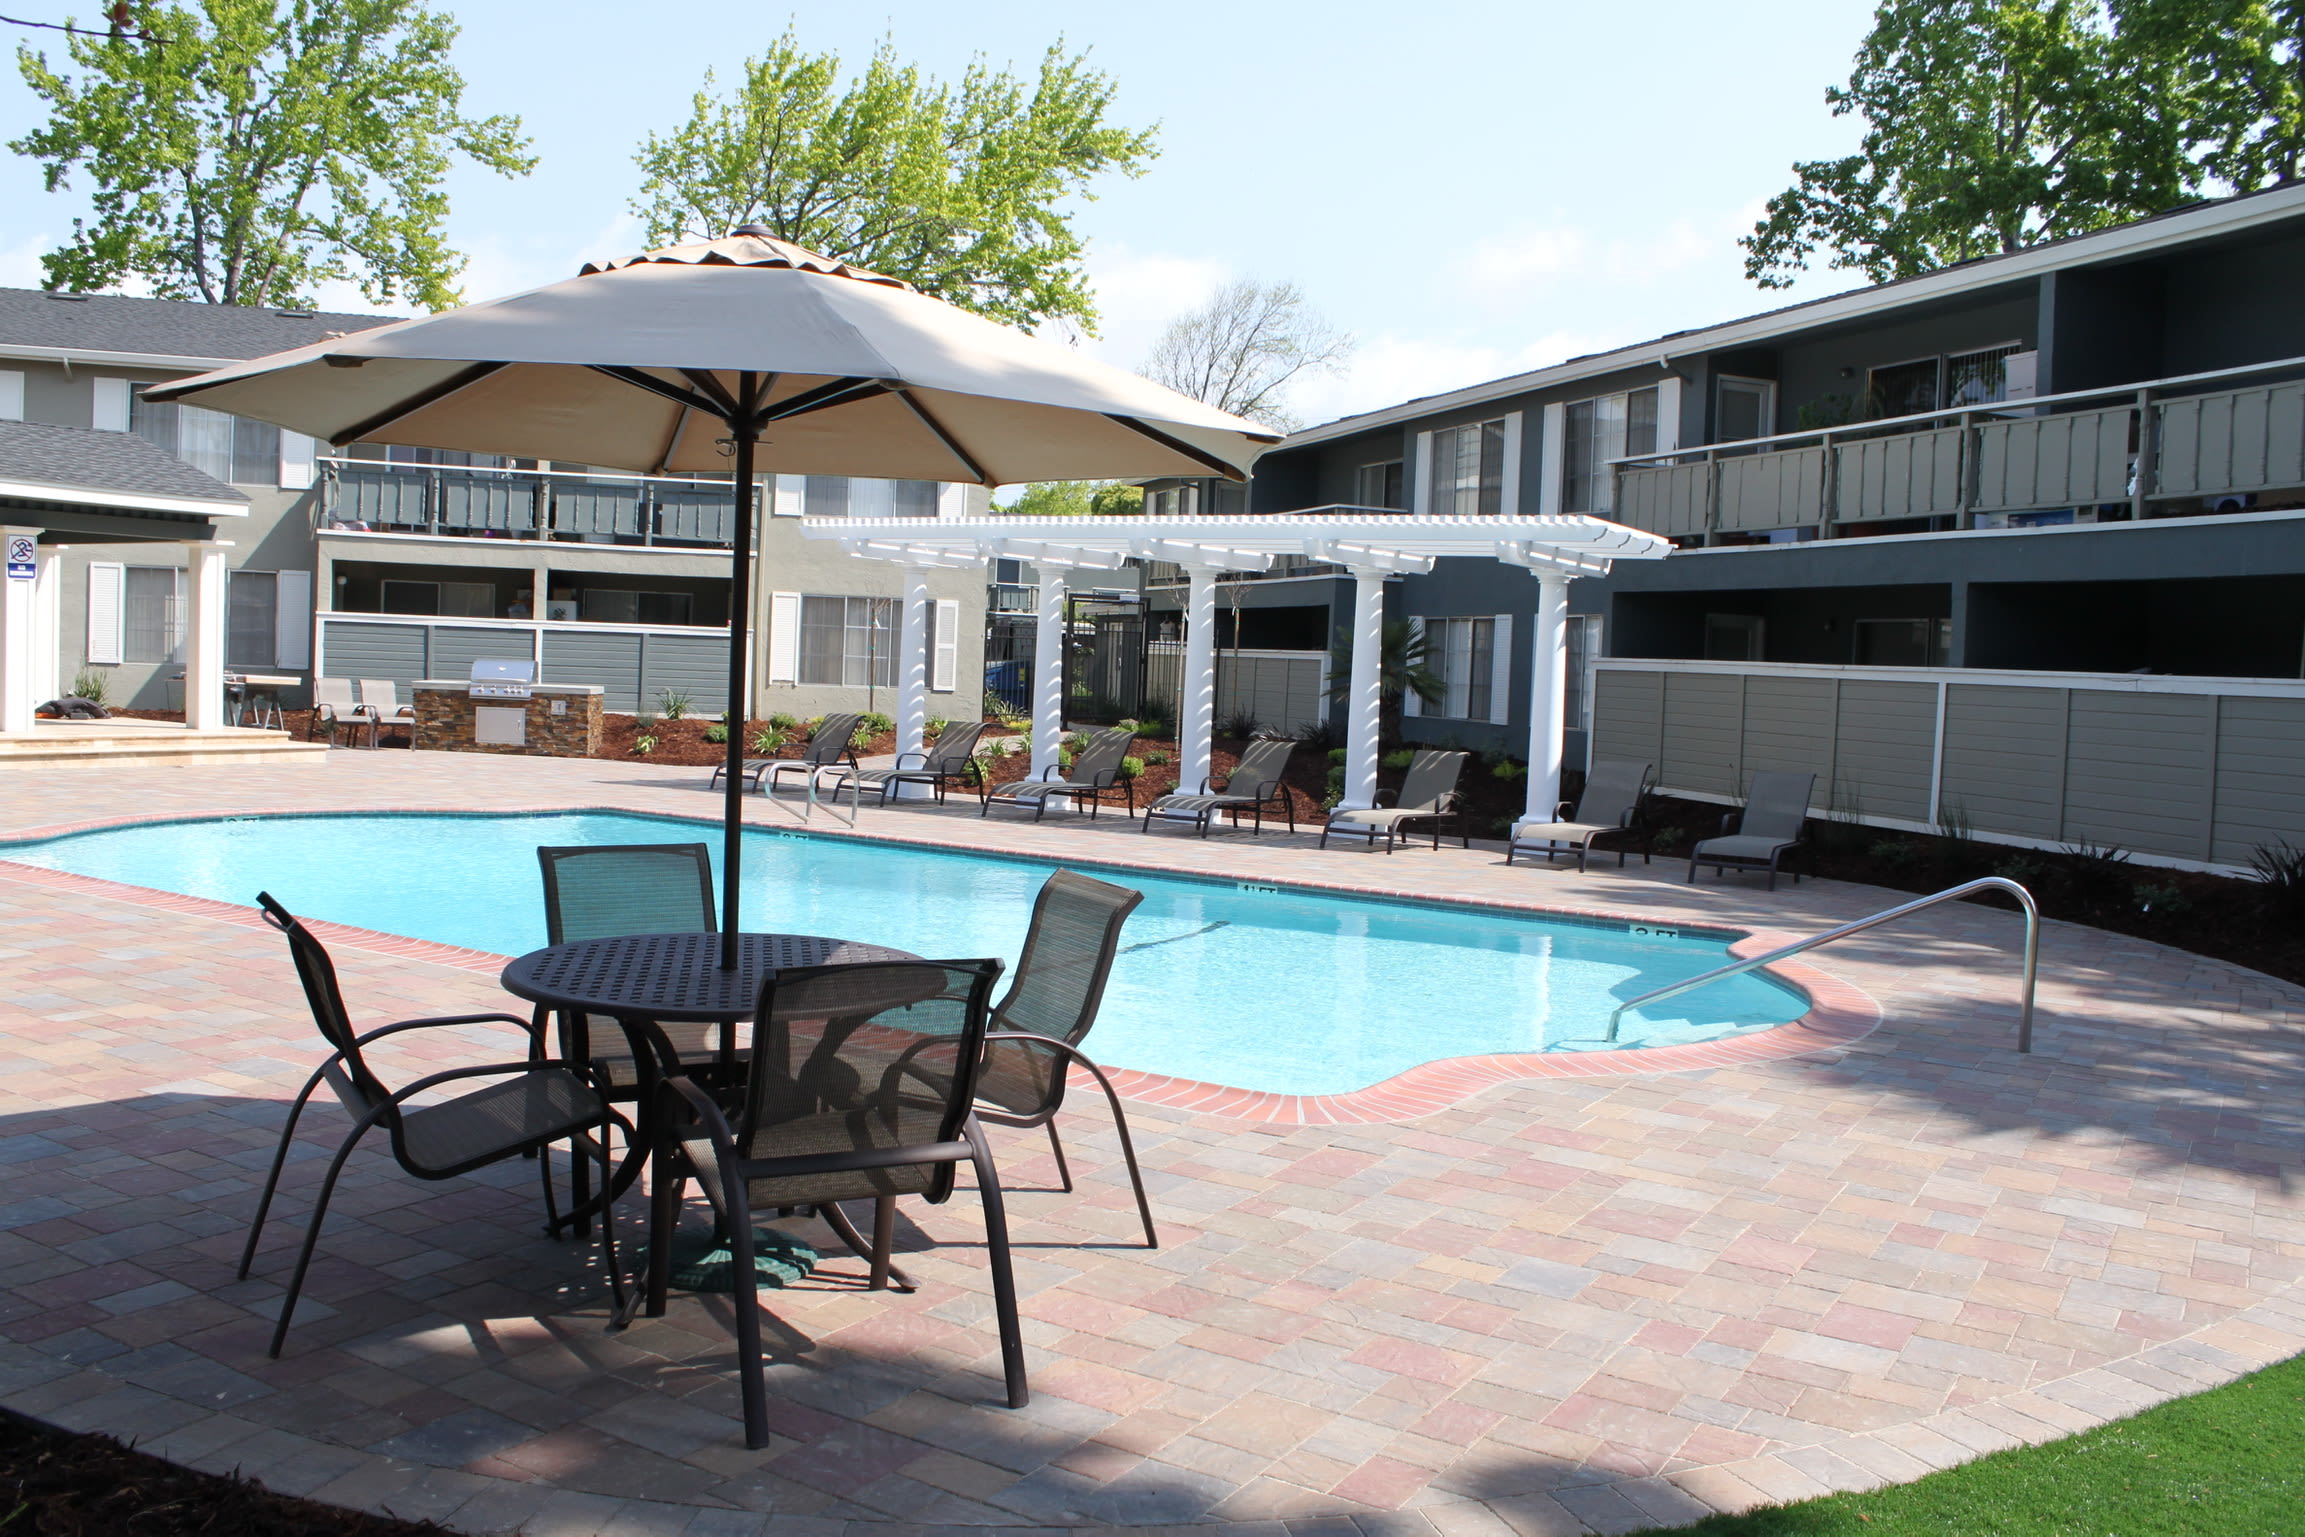 Chaise lounge chairs by the pool at Pinebrook Apartment Homes in Fremont, California